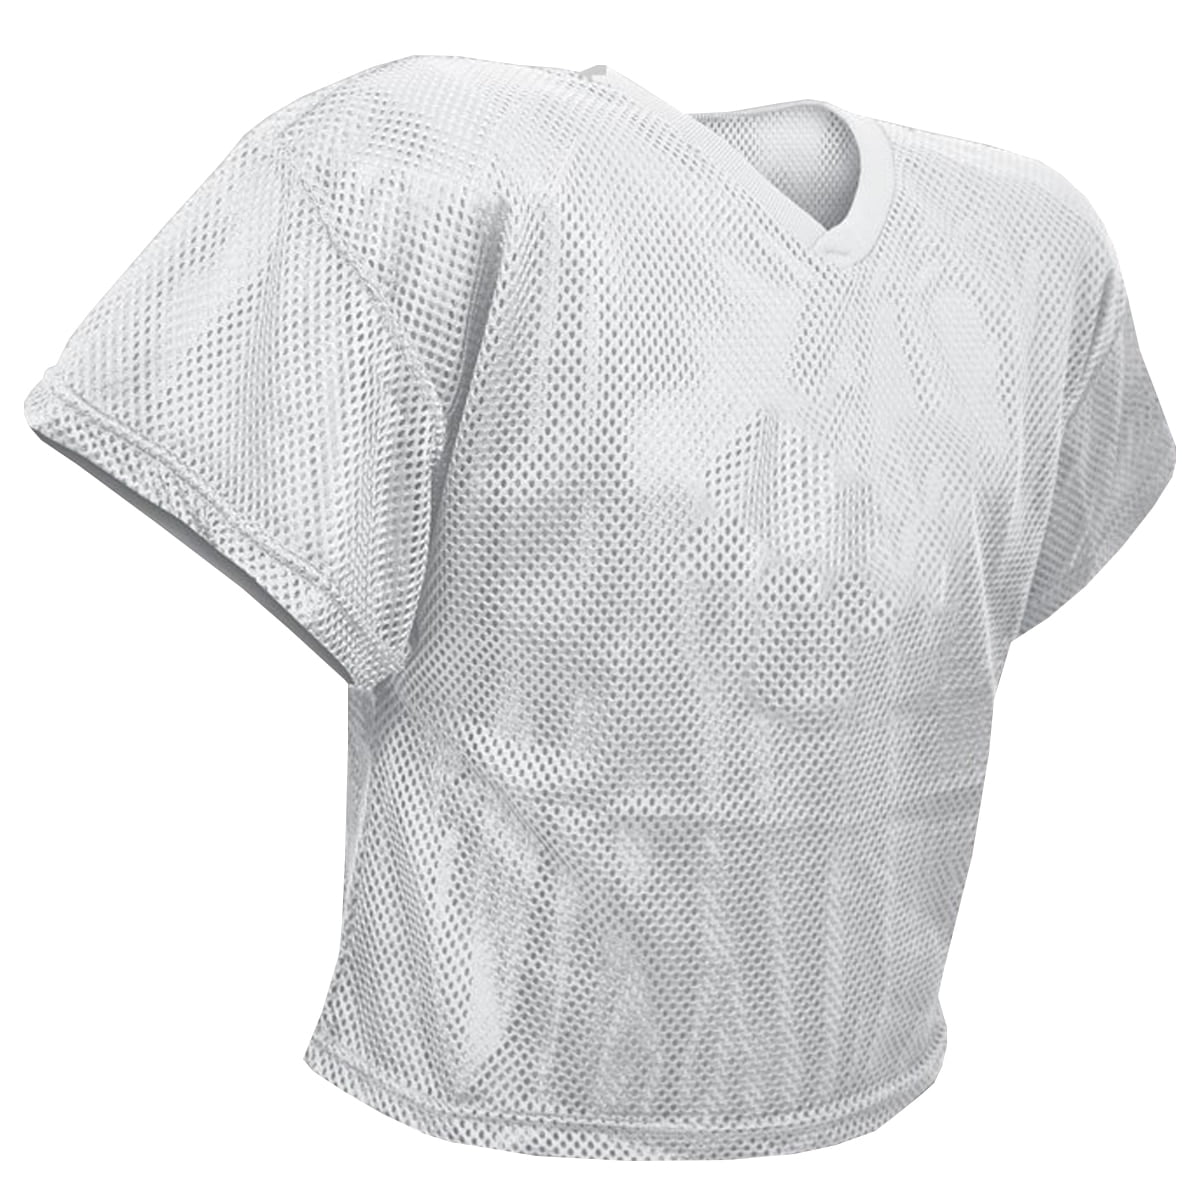 Champro Porthole Mesh Youth Football Practice Jersey NEW Lists @ $15 White 